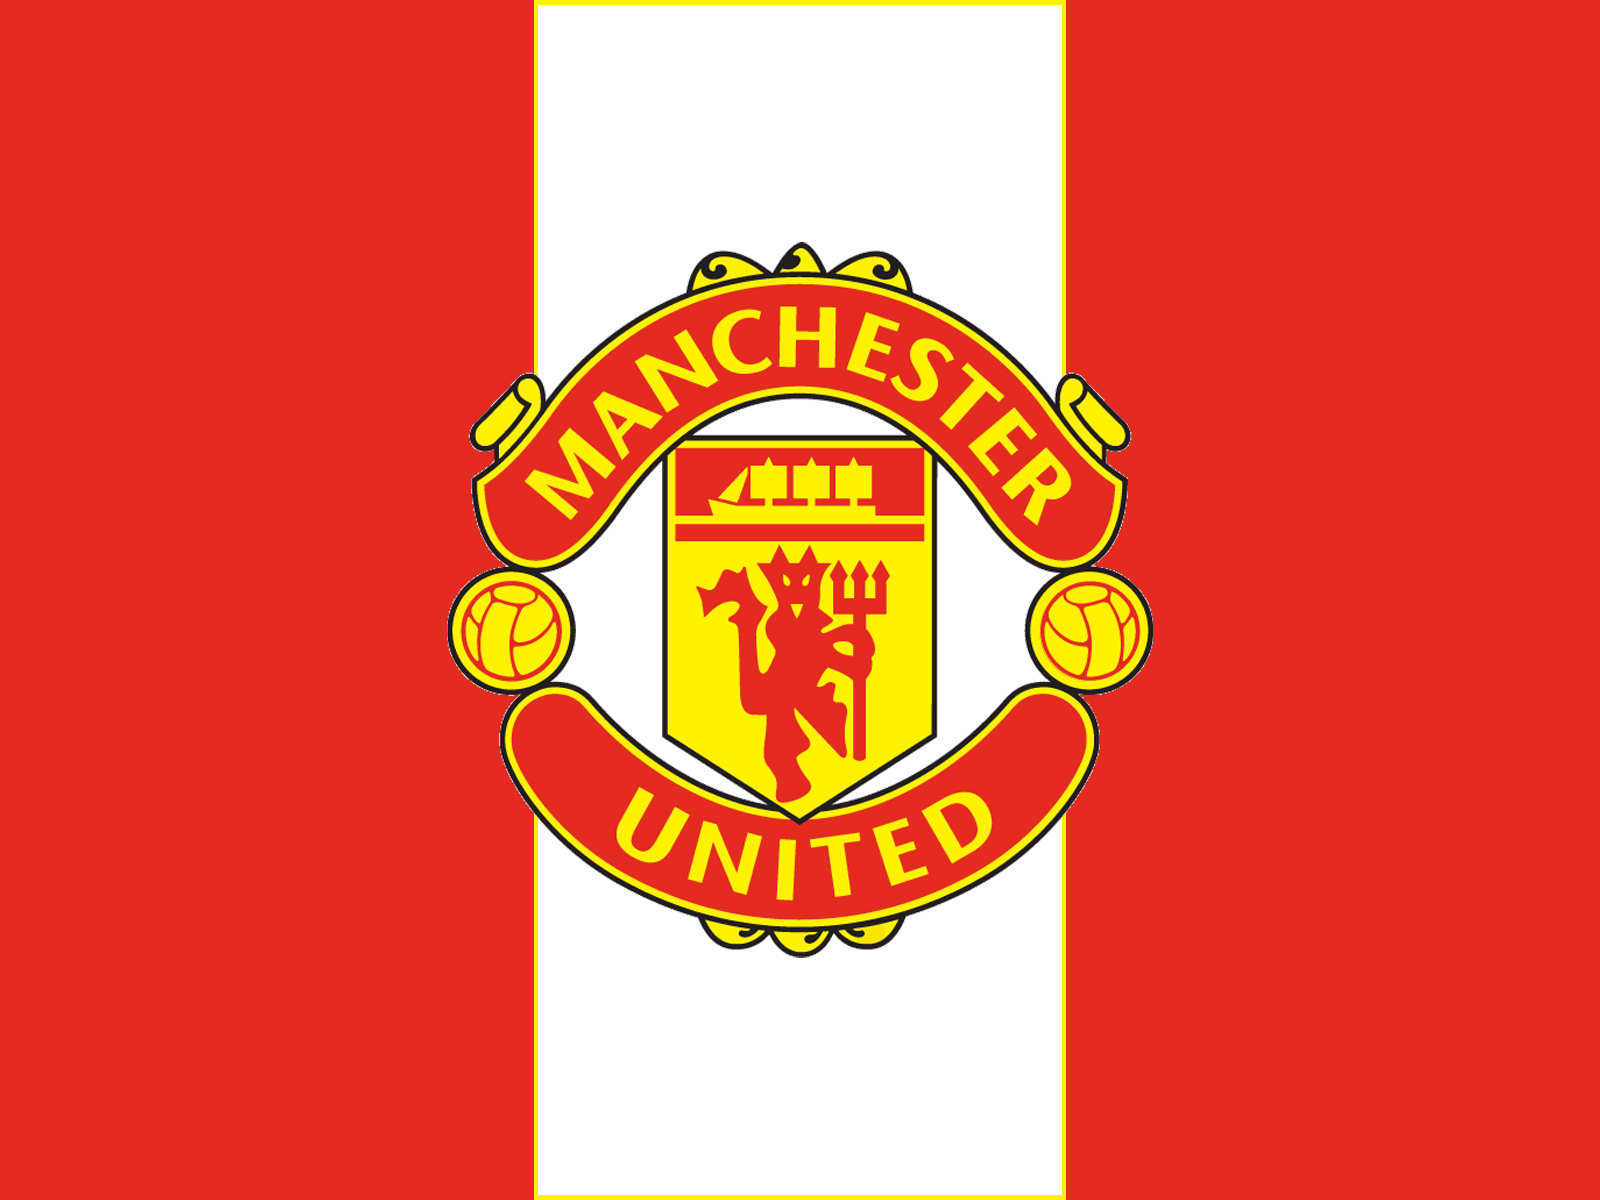 Manchester United Wallpaper 1080p Pictures In High Definition